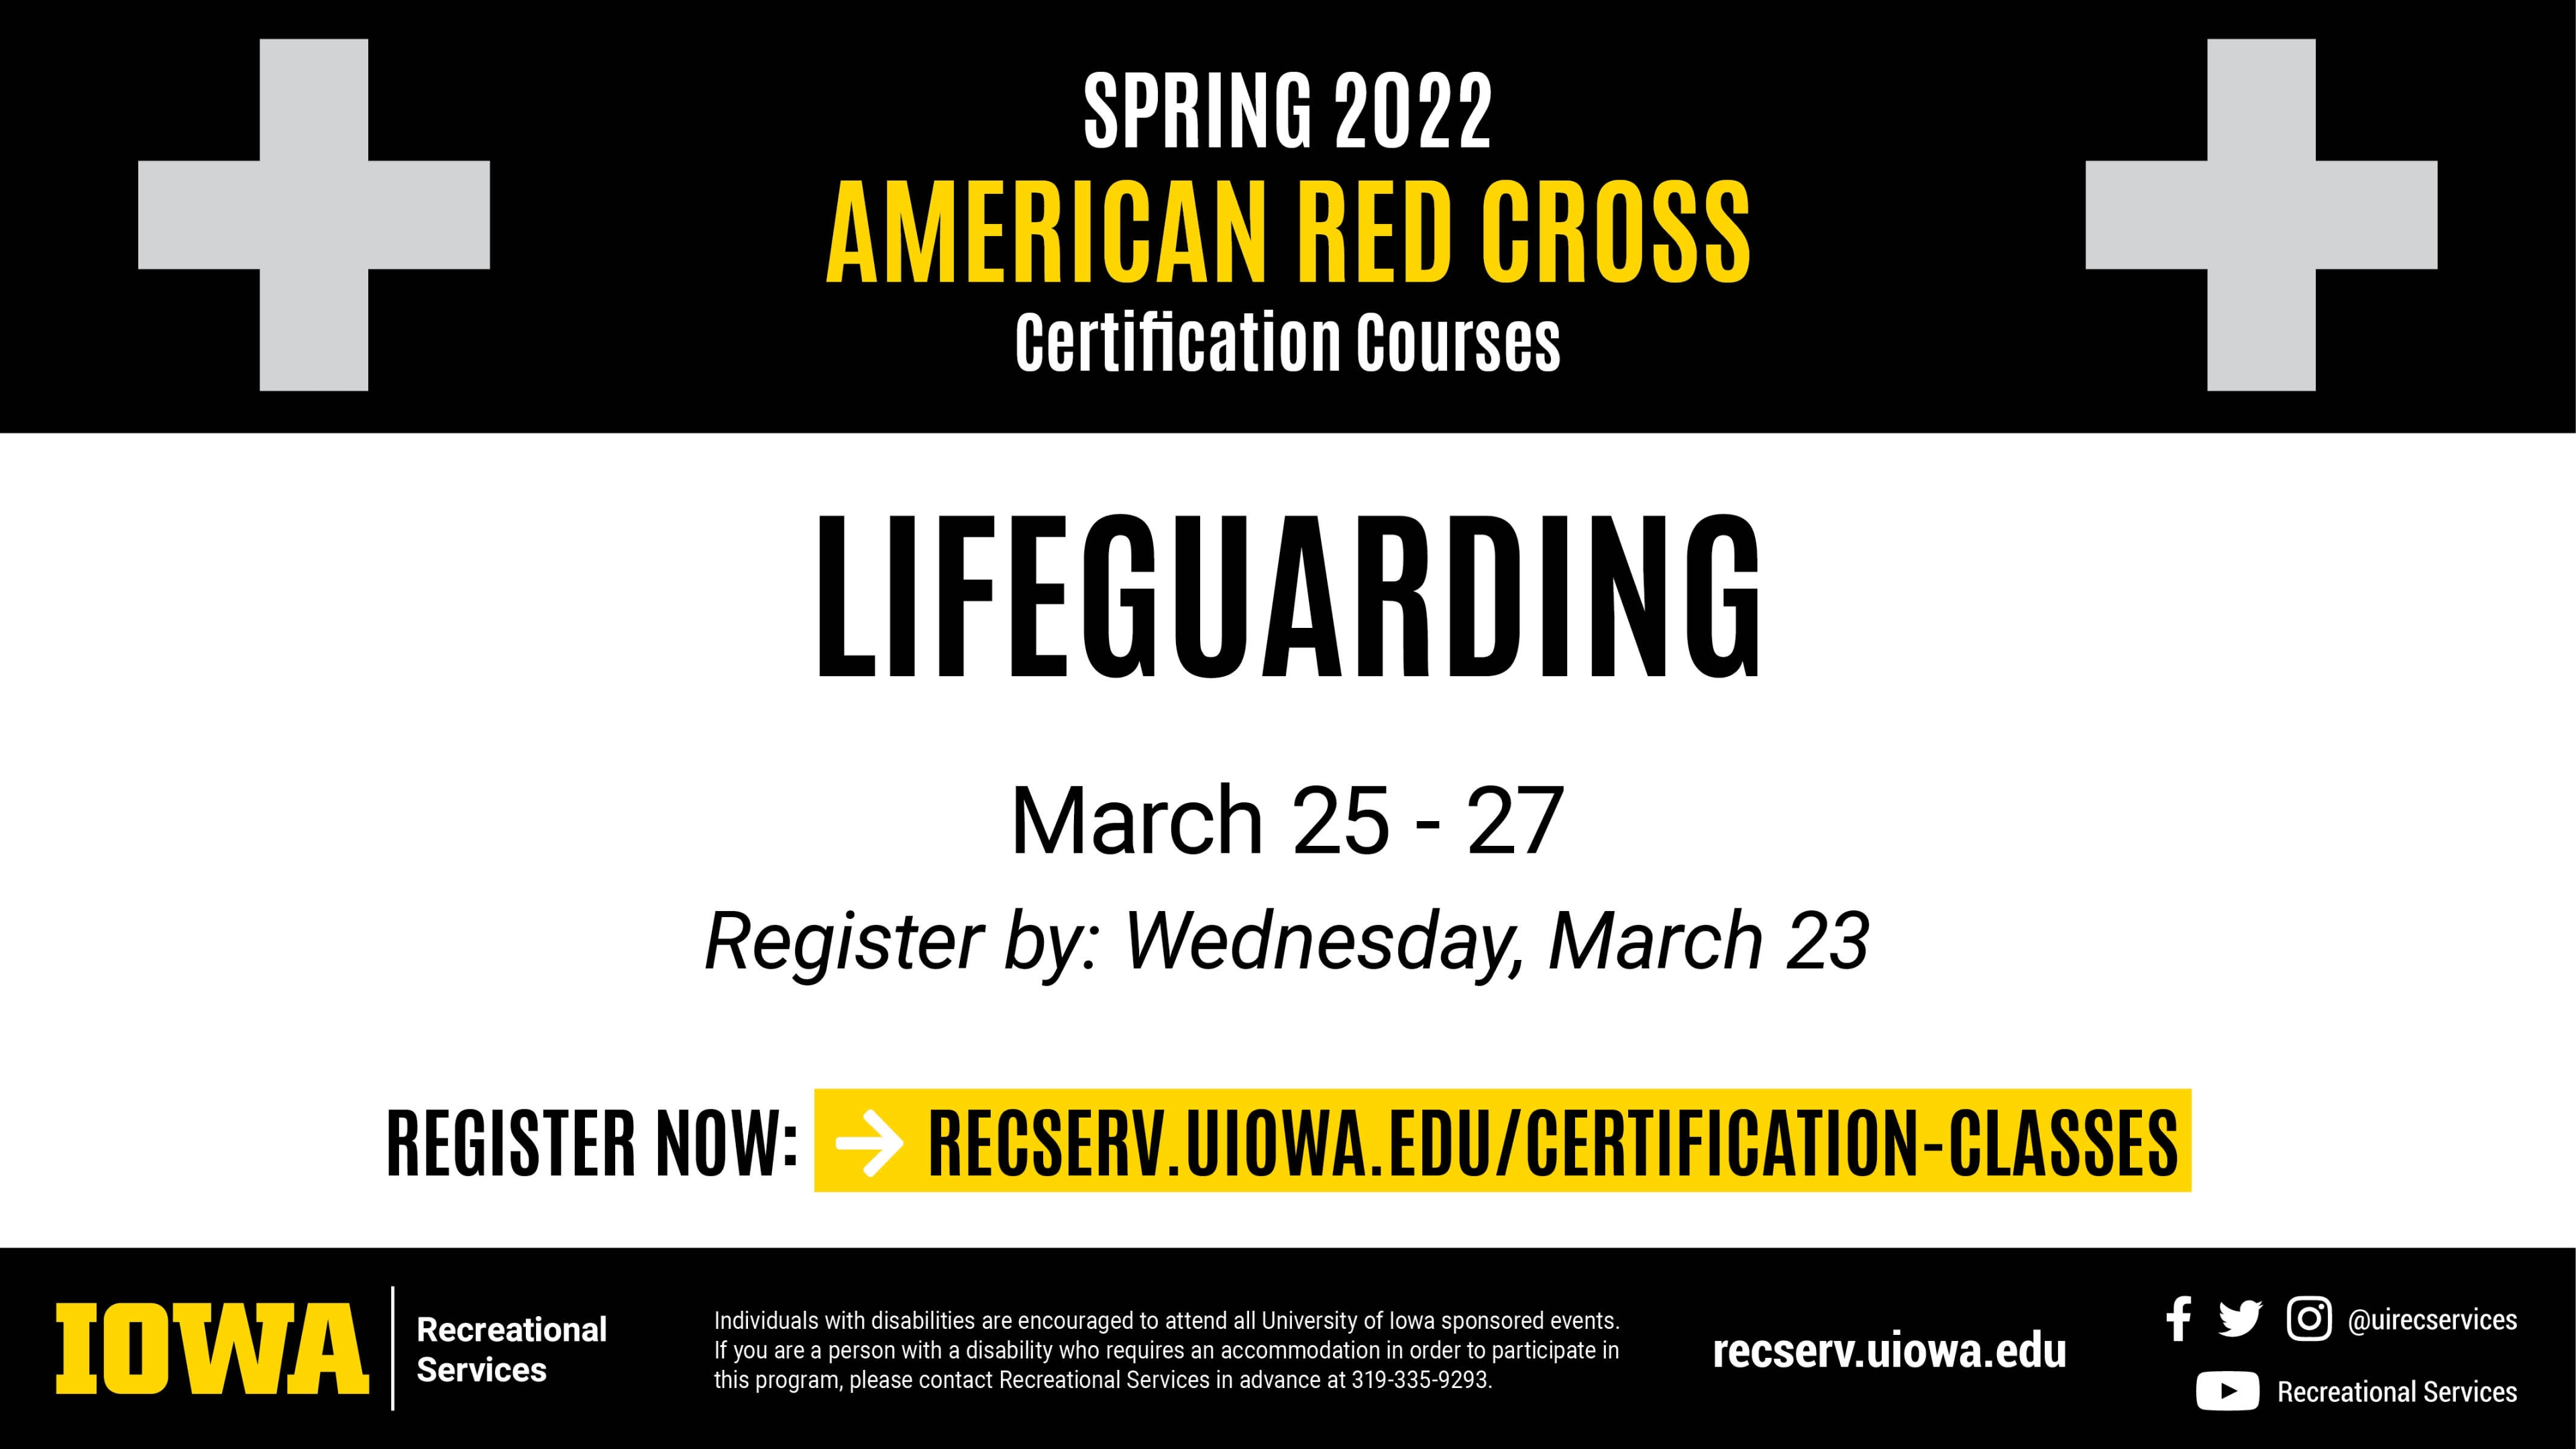 Spring 2022 American Red Cross Certification Courses Lifeguarding March 25 - 27 Register by: Wednesdays, March 23/ Register now: recserv.uiowa.edu/certification-classes